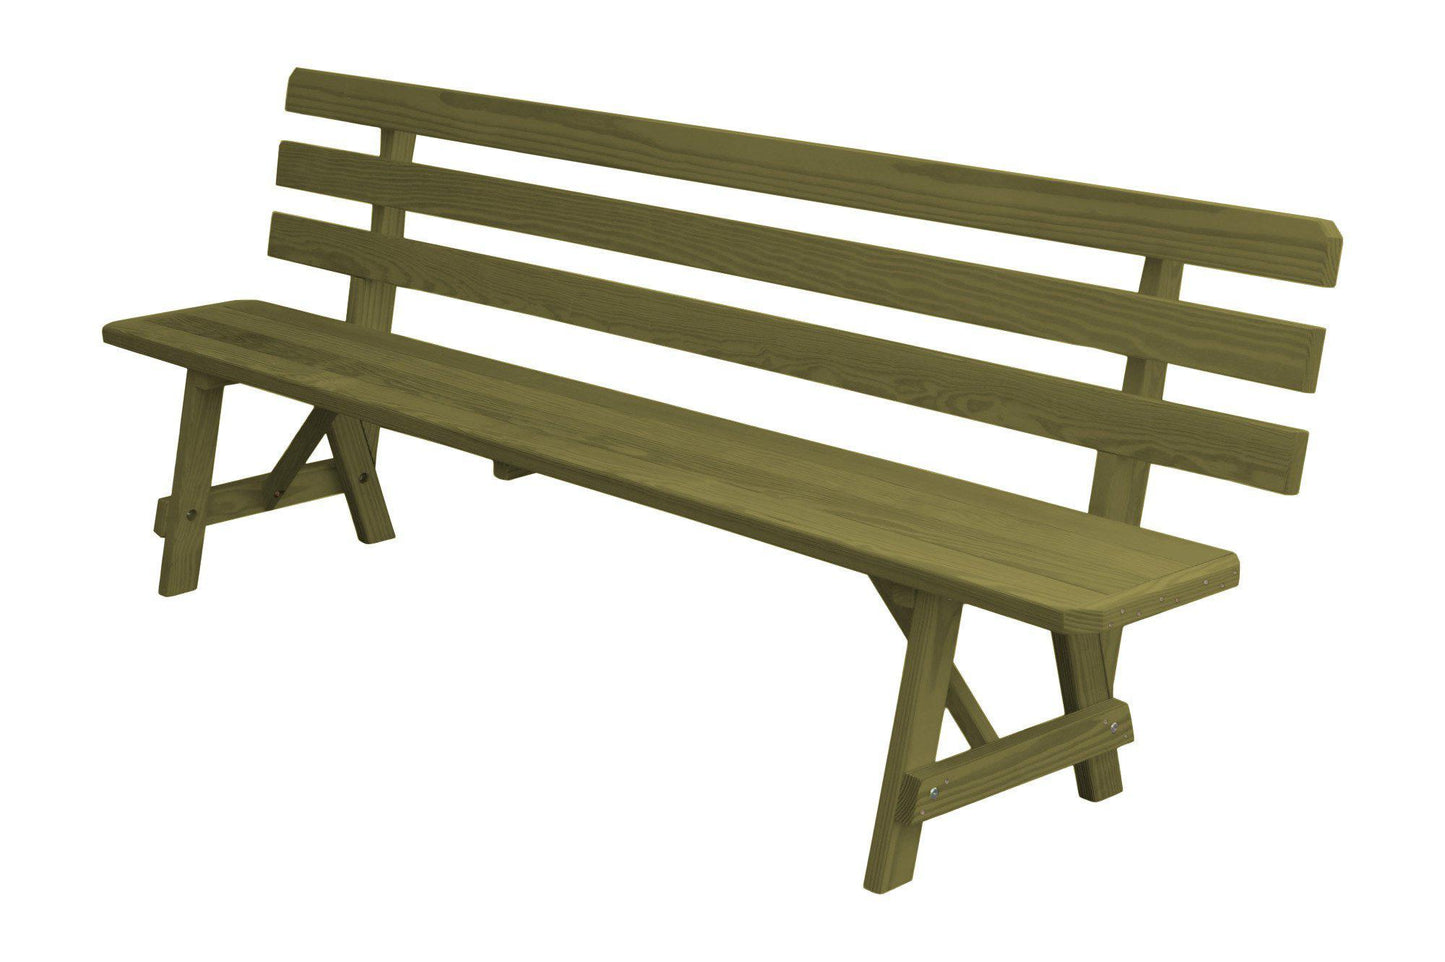 A&L Furniture Co. Yellow Pine 95" Traditional Backed Bench Only - LEAD TIME TO SHIP 10 BUSINESS DAYS